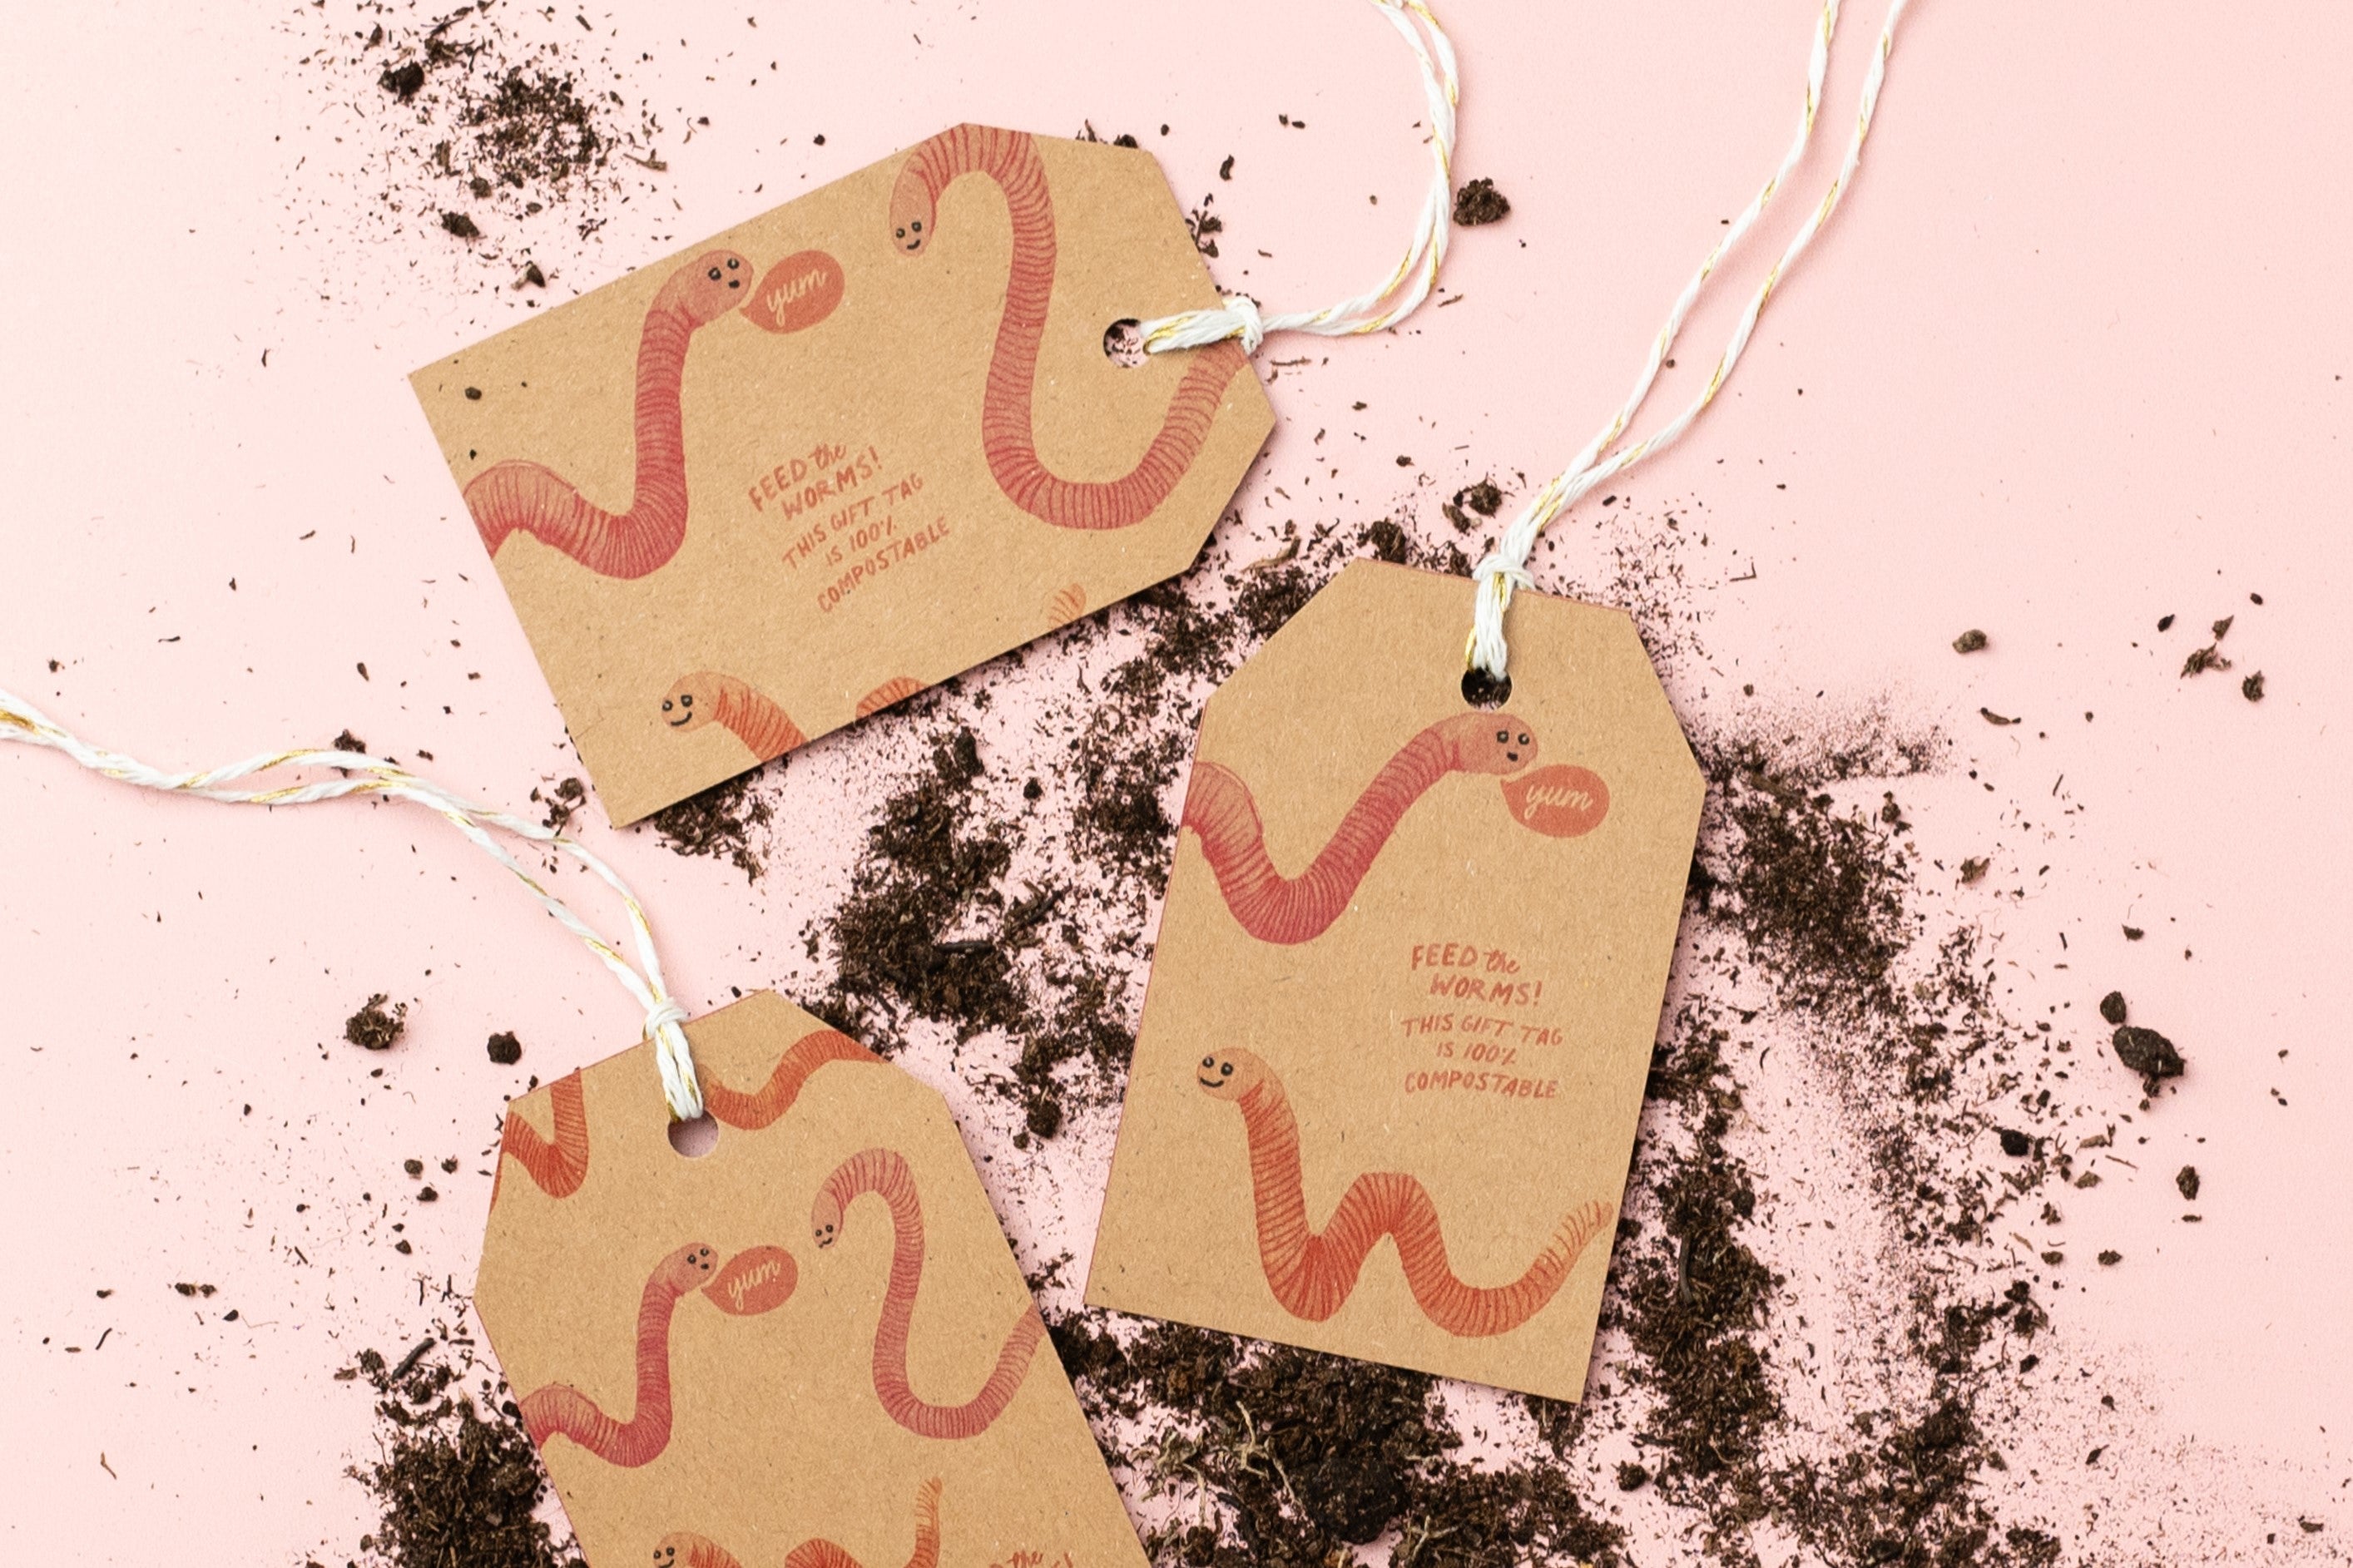 Ruby & Bo kraft paper gift tags on a pale pink background with a scattering of compost